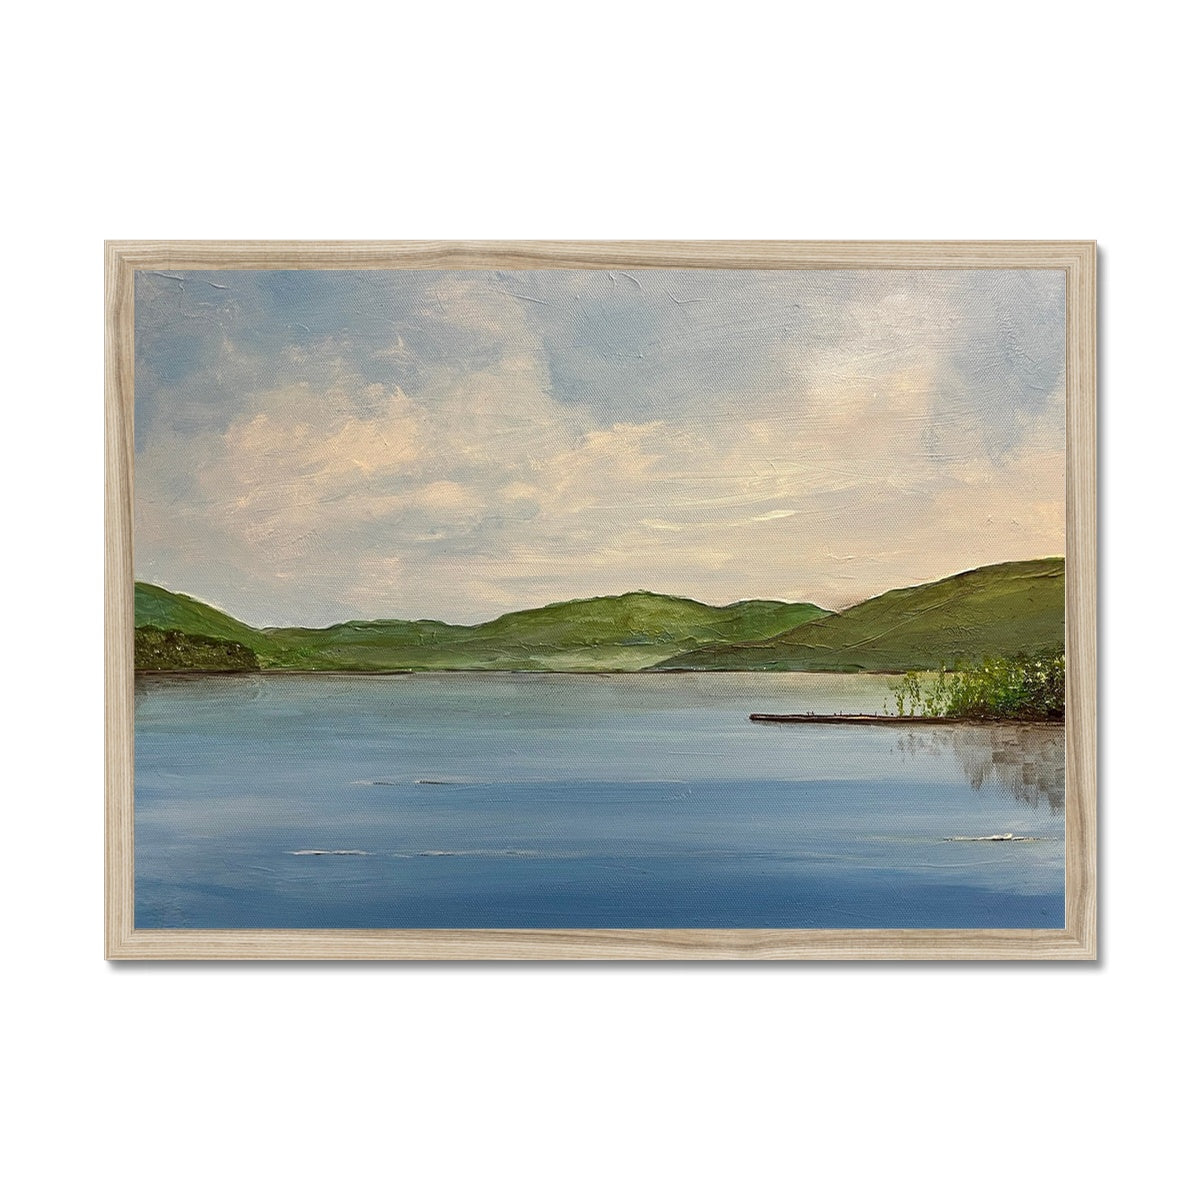 Loch Tay ii Painting | Framed Prints From Scotland-Framed Prints-Scottish Lochs & Mountains Art Gallery-A2 Landscape-Natural Frame-Paintings, Prints, Homeware, Art Gifts From Scotland By Scottish Artist Kevin Hunter